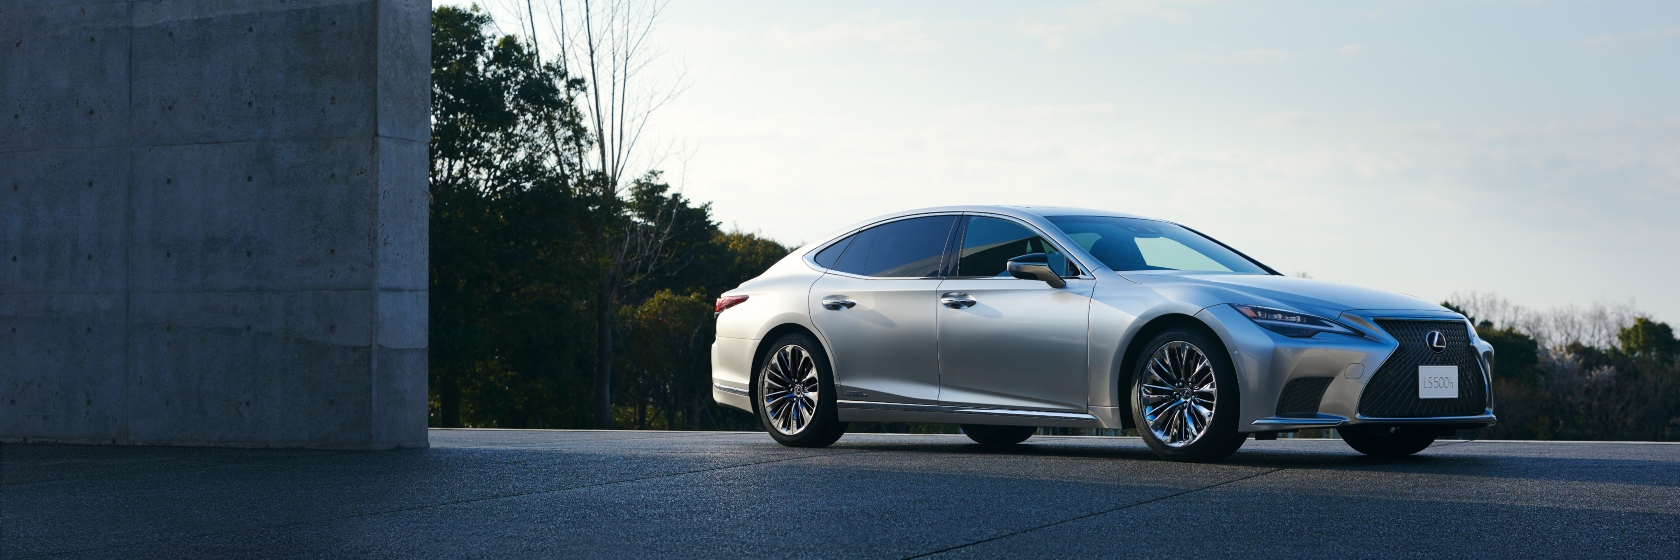 introducing-the-new-lexus-ls-a-closer-look-at-its-design-and-features